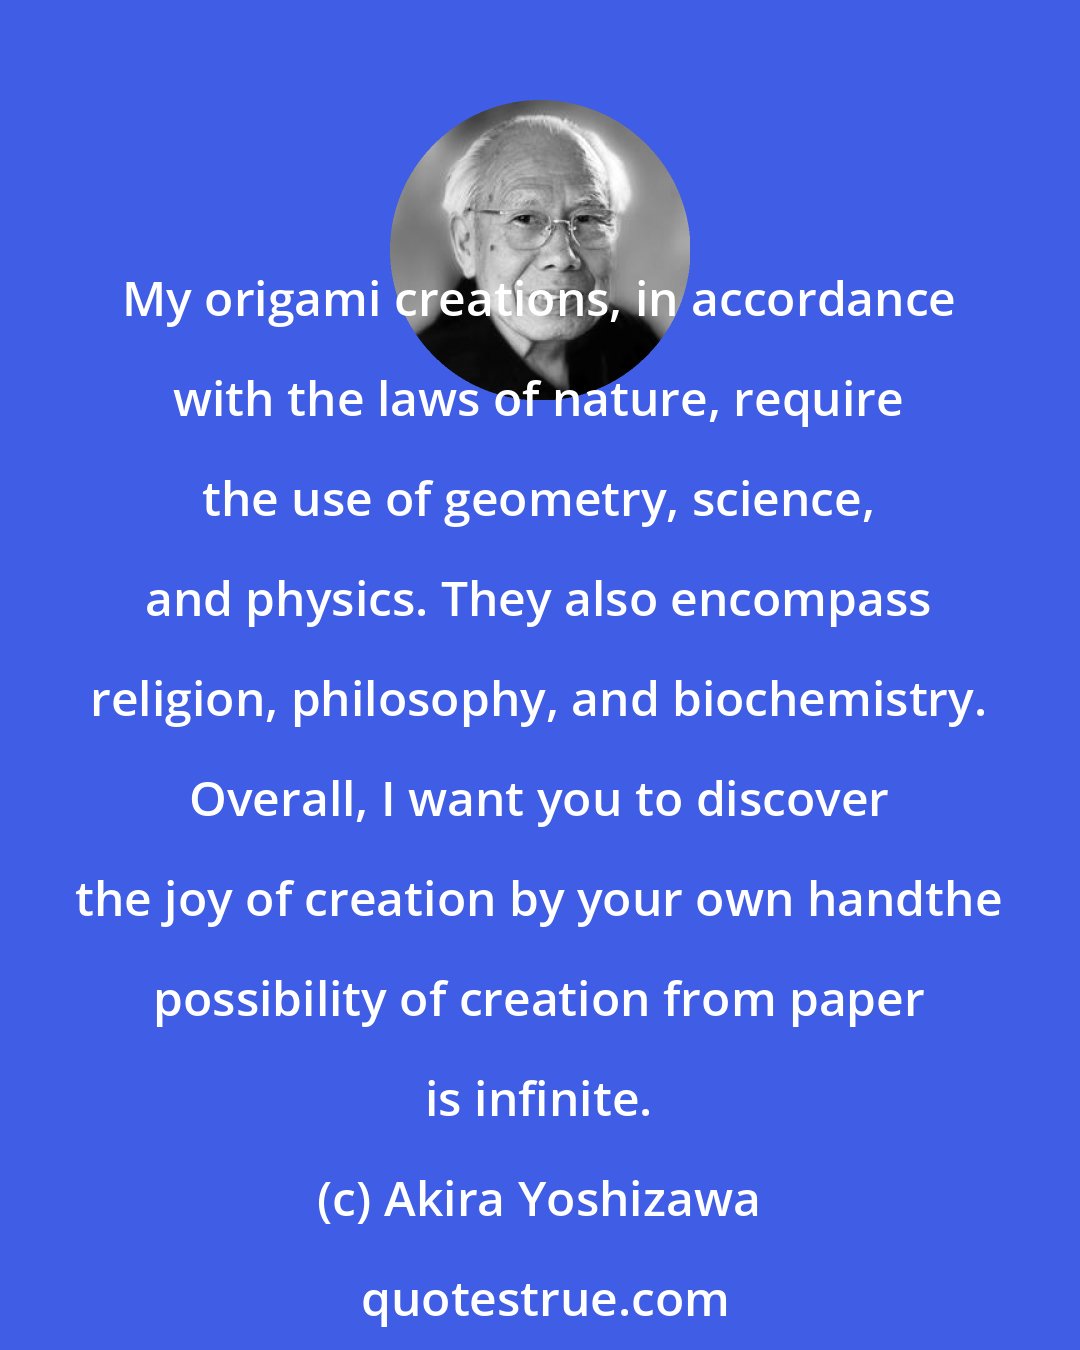 Akira Yoshizawa: My origami creations, in accordance with the laws of nature, require the use of geometry, science, and physics. They also encompass religion, philosophy, and biochemistry. Overall, I want you to discover the joy of creation by your own handthe possibility of creation from paper is infinite.